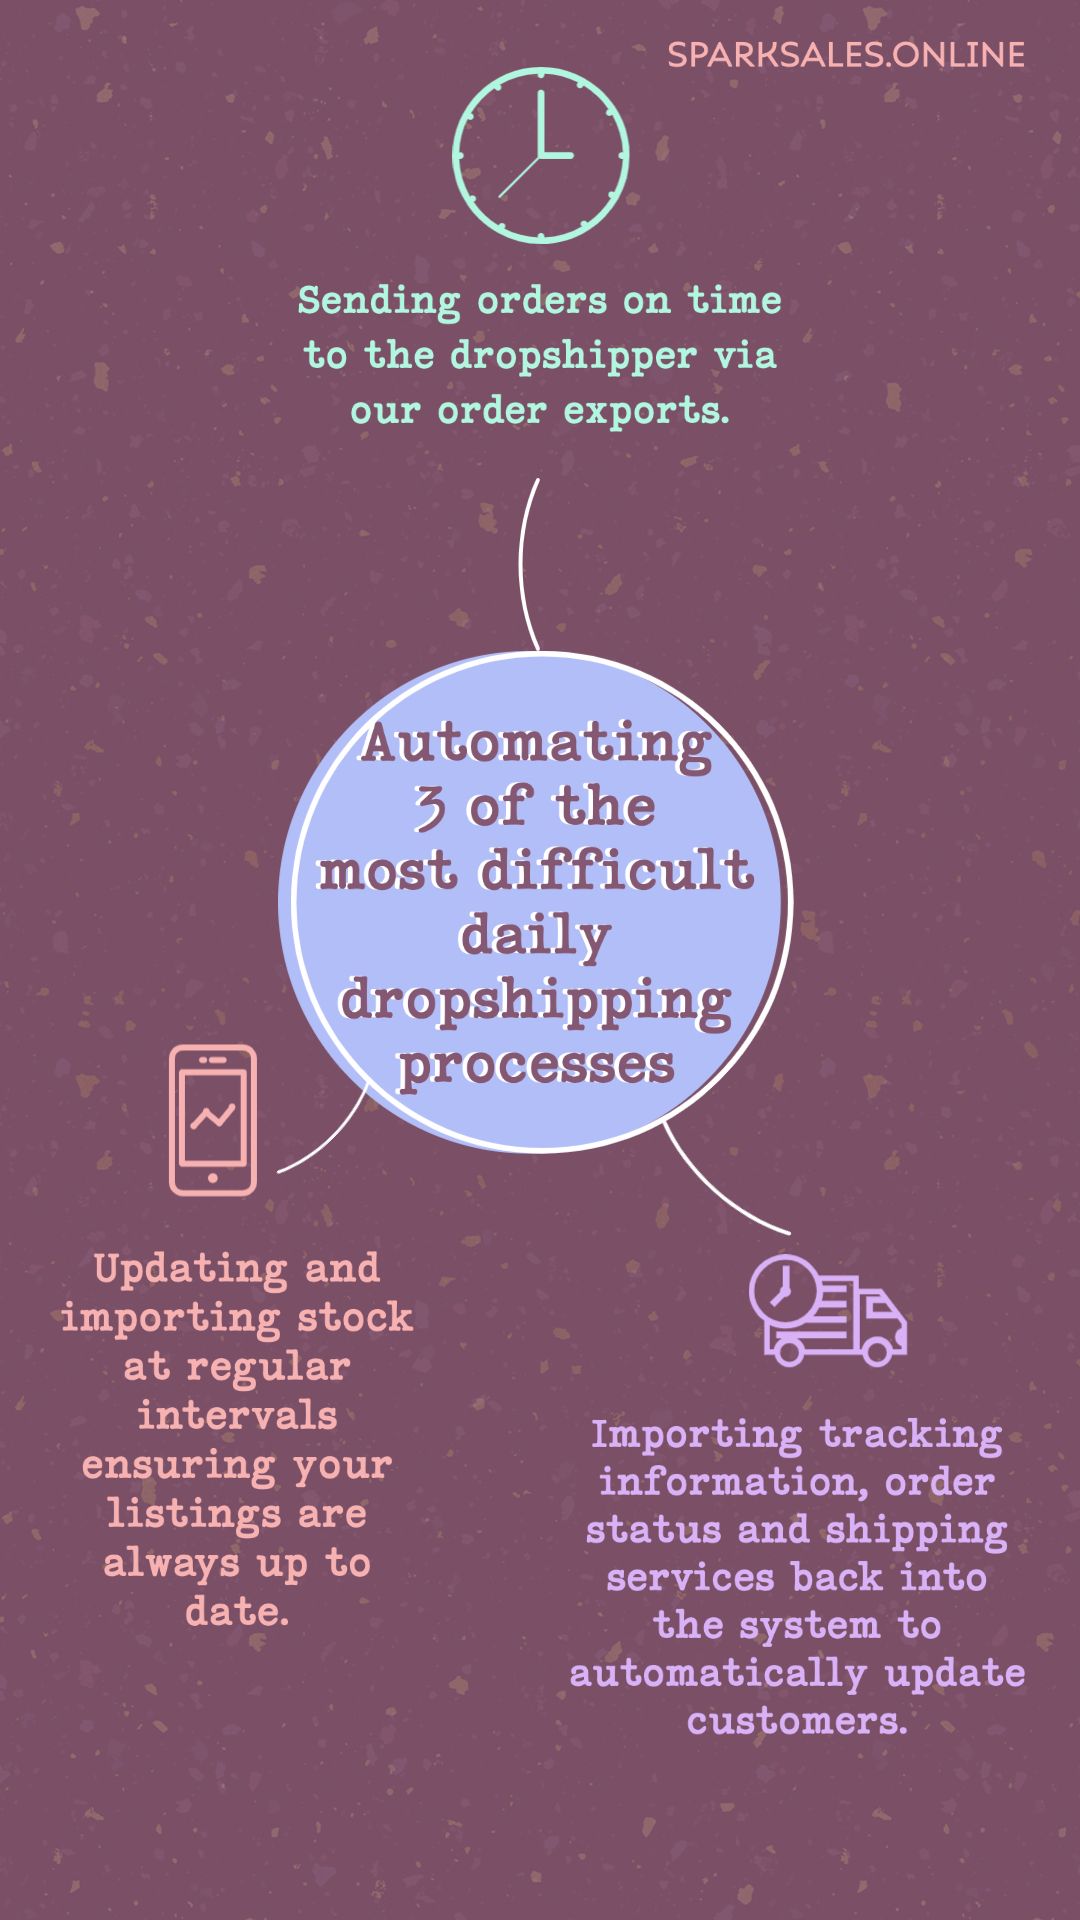 Automating three of the most difficult daily dropshipping processes